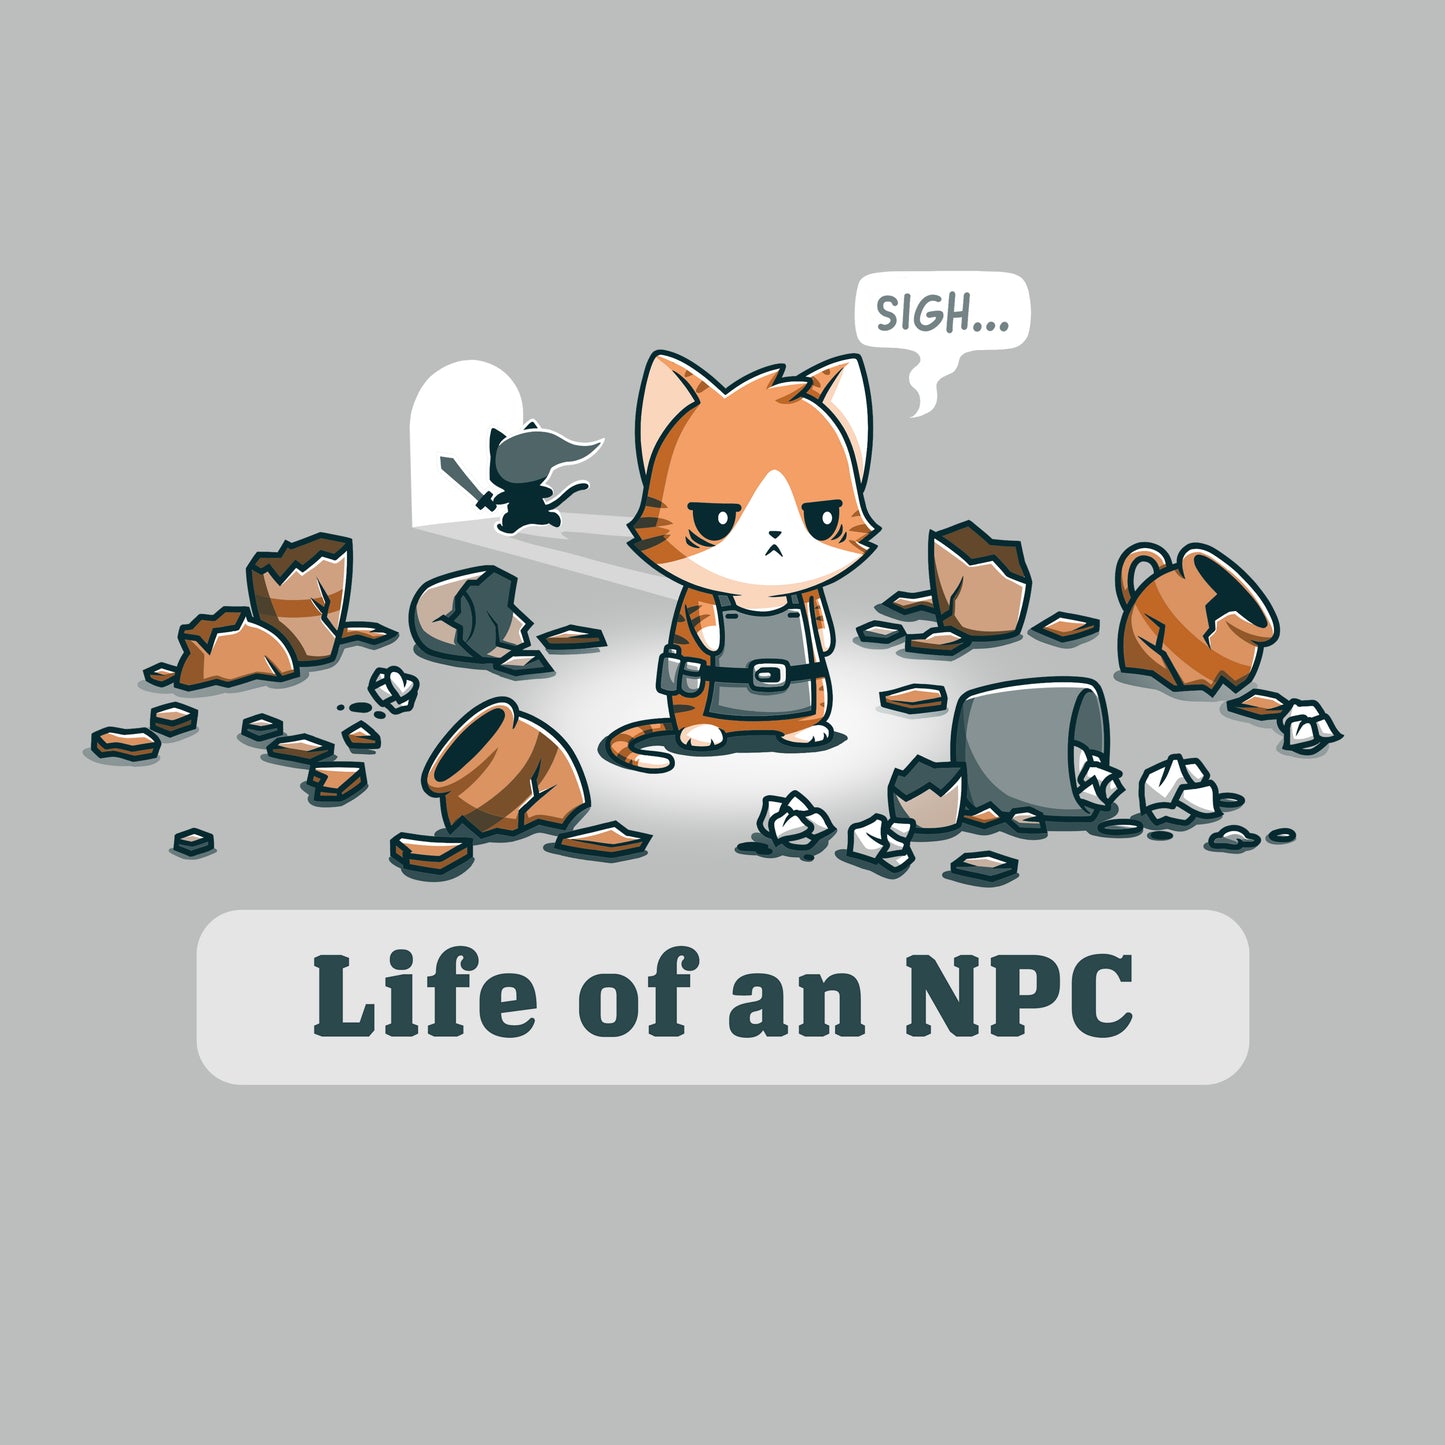 Illustration of a sad cat dressed as an NPC in a silver T-shirt surrounded by broken pots and debris, with a speech bubble saying "SIGH..." and the text "Life Of An NPC by monsterdigital" below.